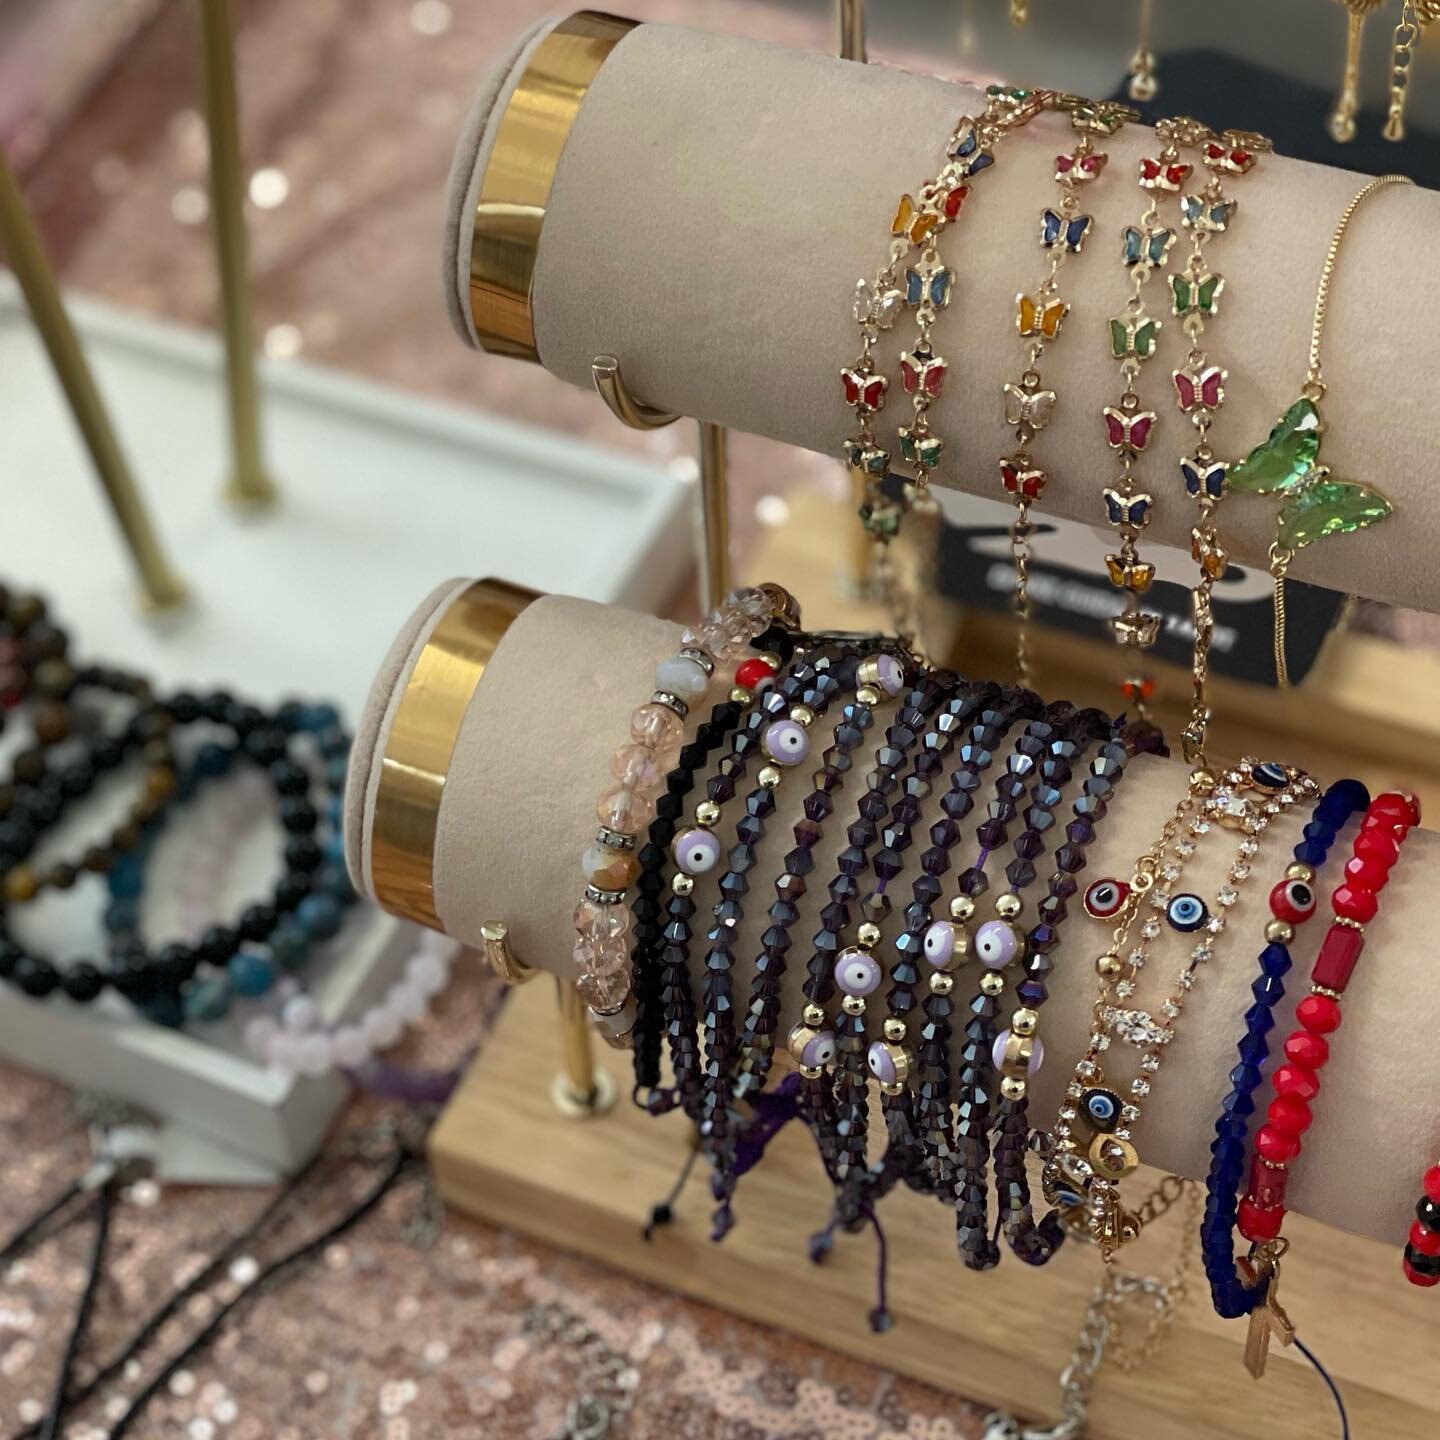 At an Art and Culture Collective Market, there&rsquo;s something for everybody on your list! 😍

#shopsmall #shopsmallbusiness #art #culture #jewelry #smallbusiness #smallbiz #entrepreneur